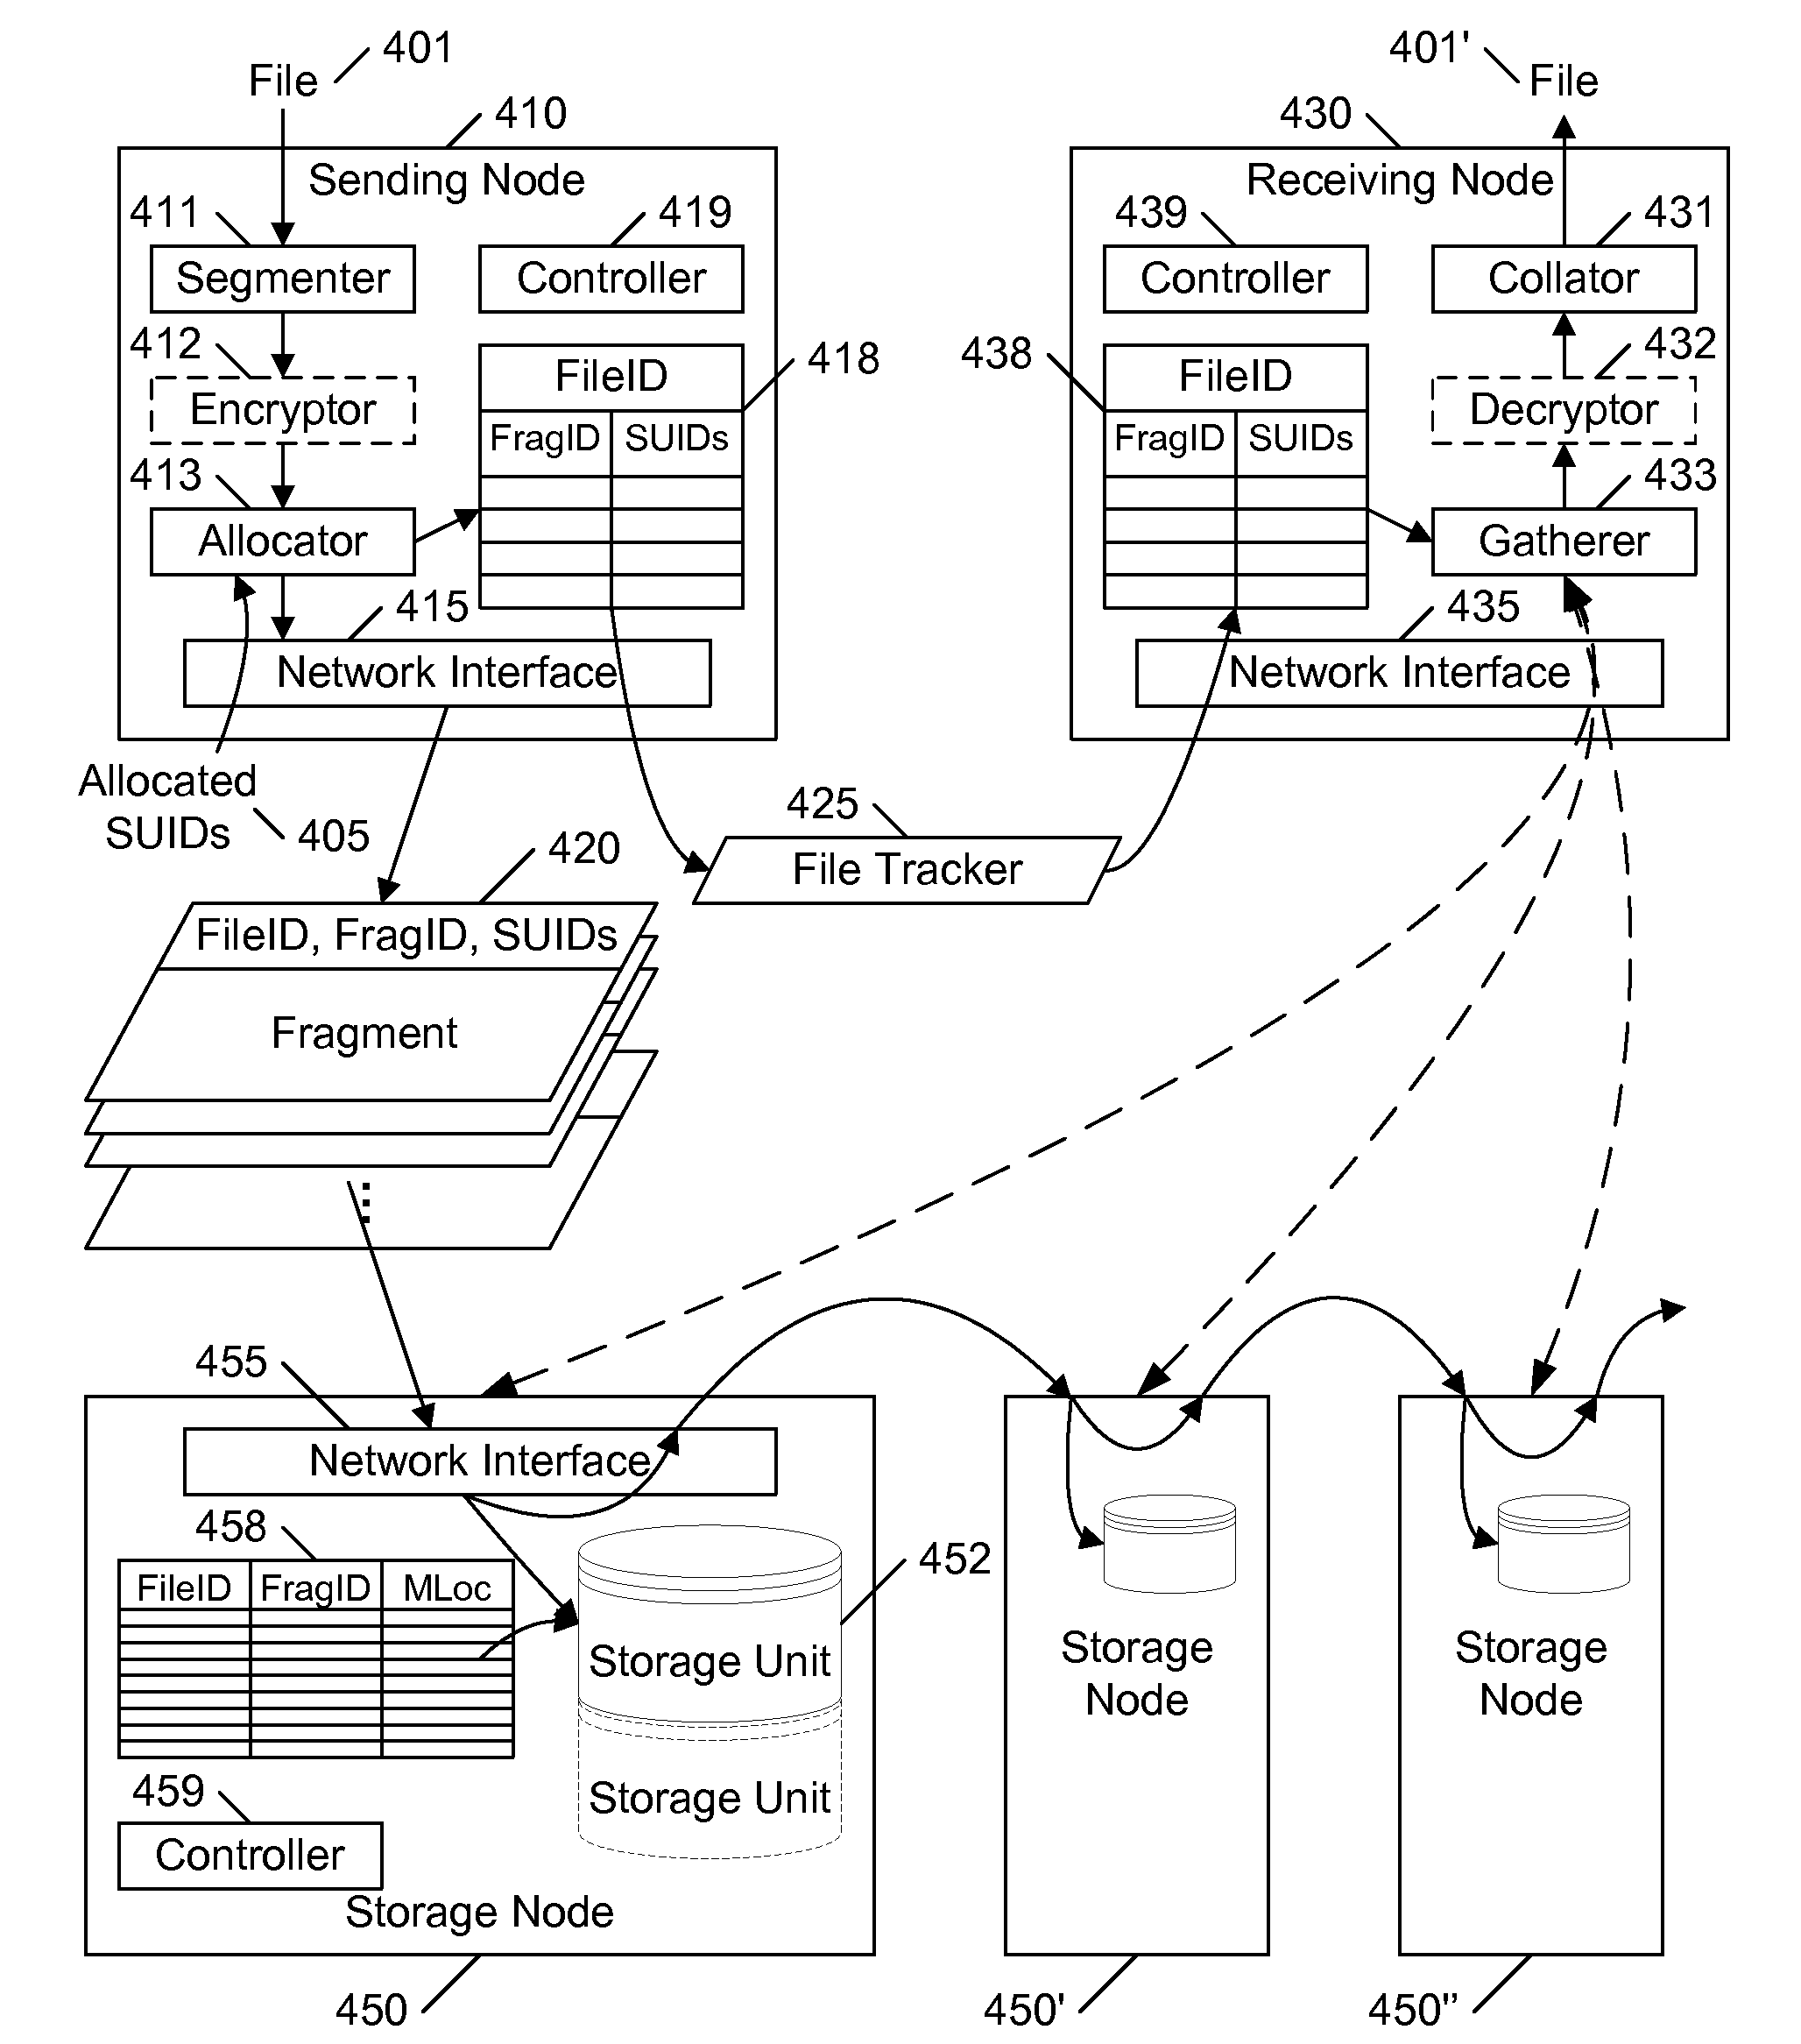 Distributed file storage and transmission system